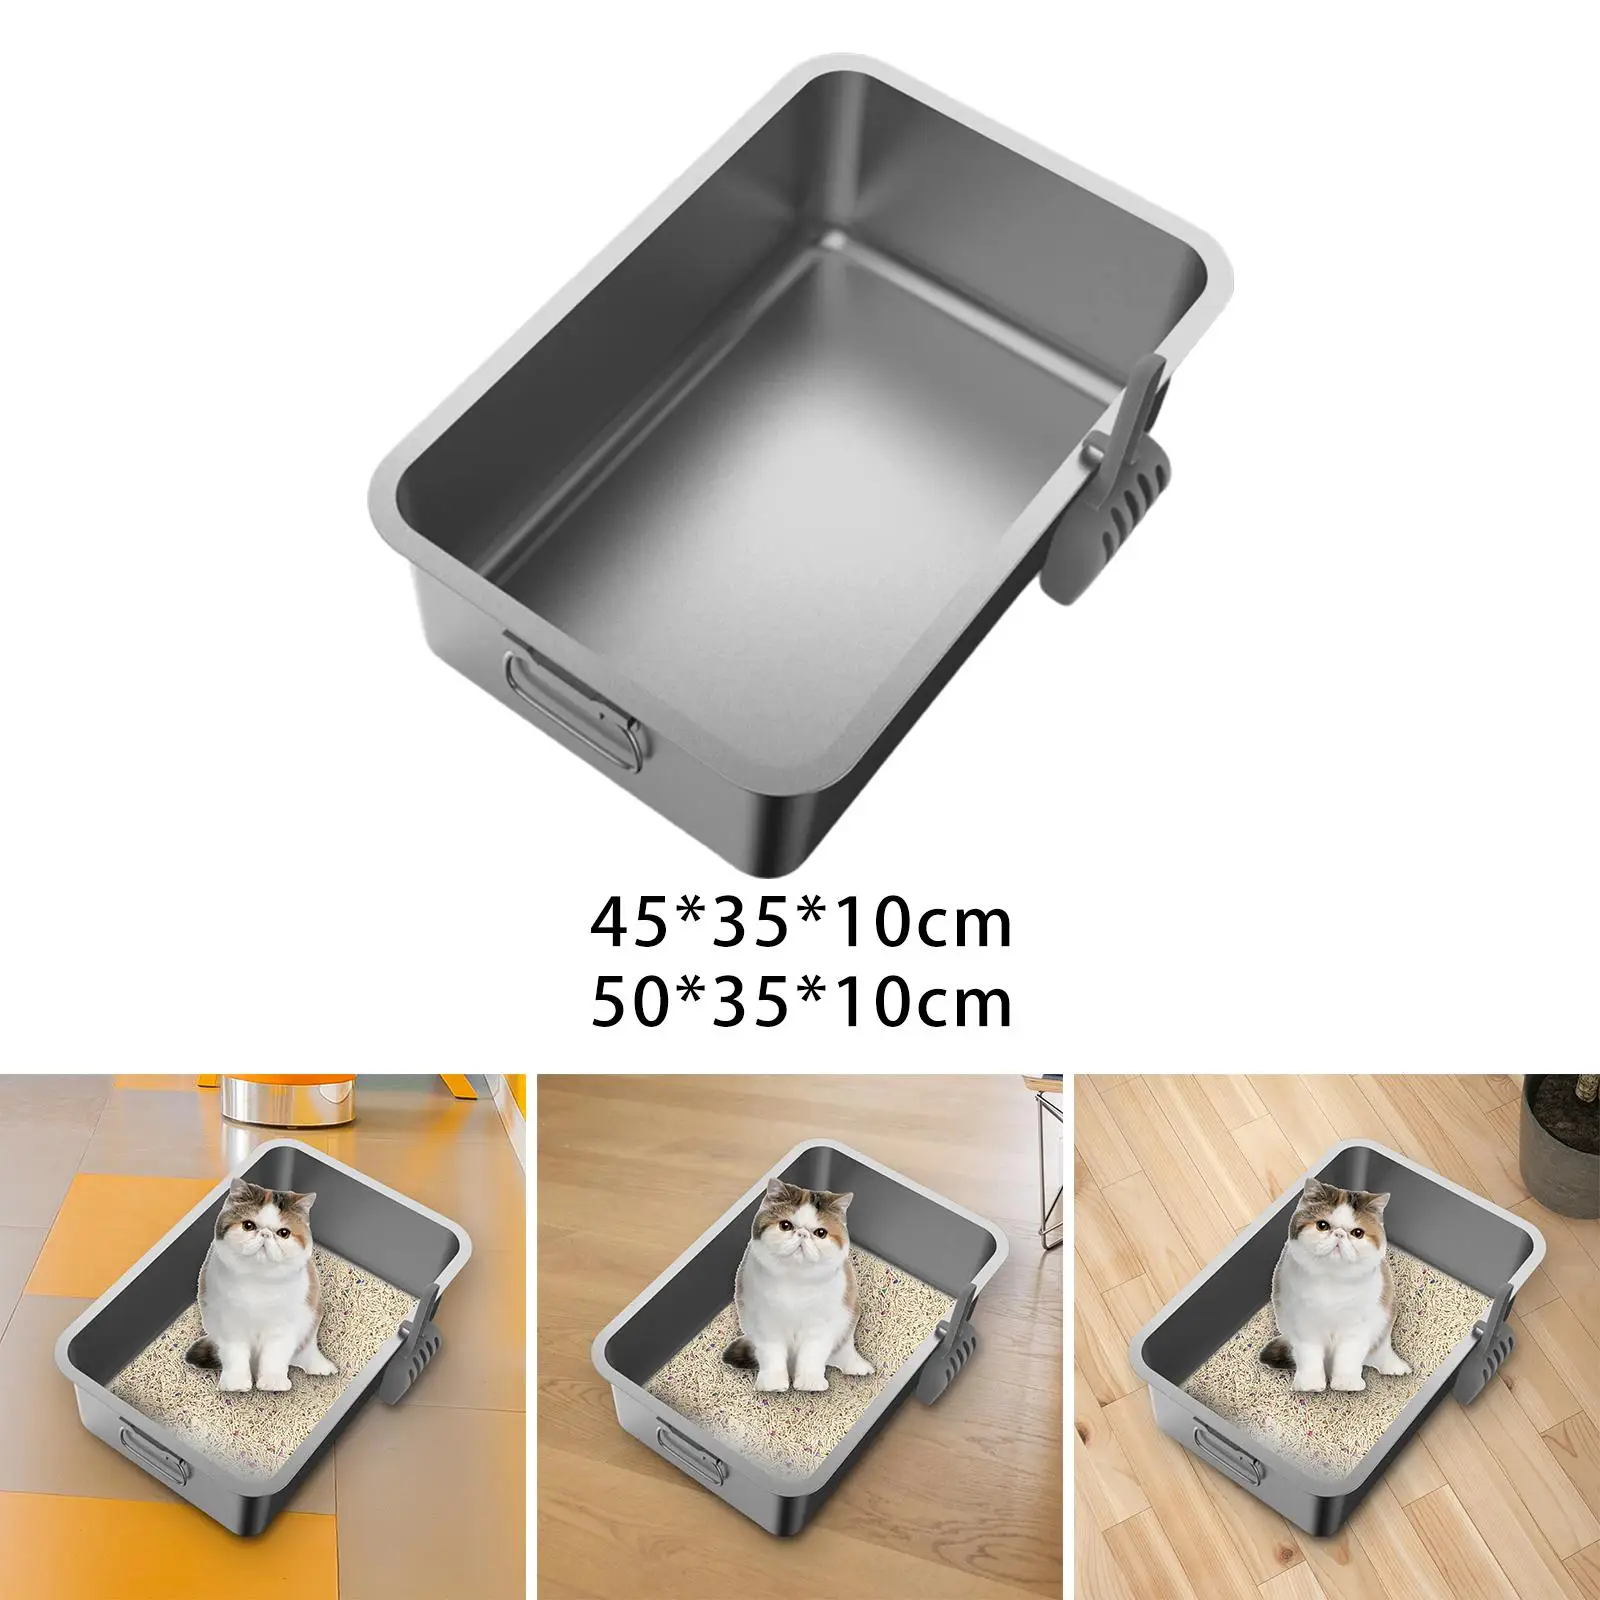 Rabbit Litter Box Holder Made of Stainless Steel, Anti-rust, with Side Carrying